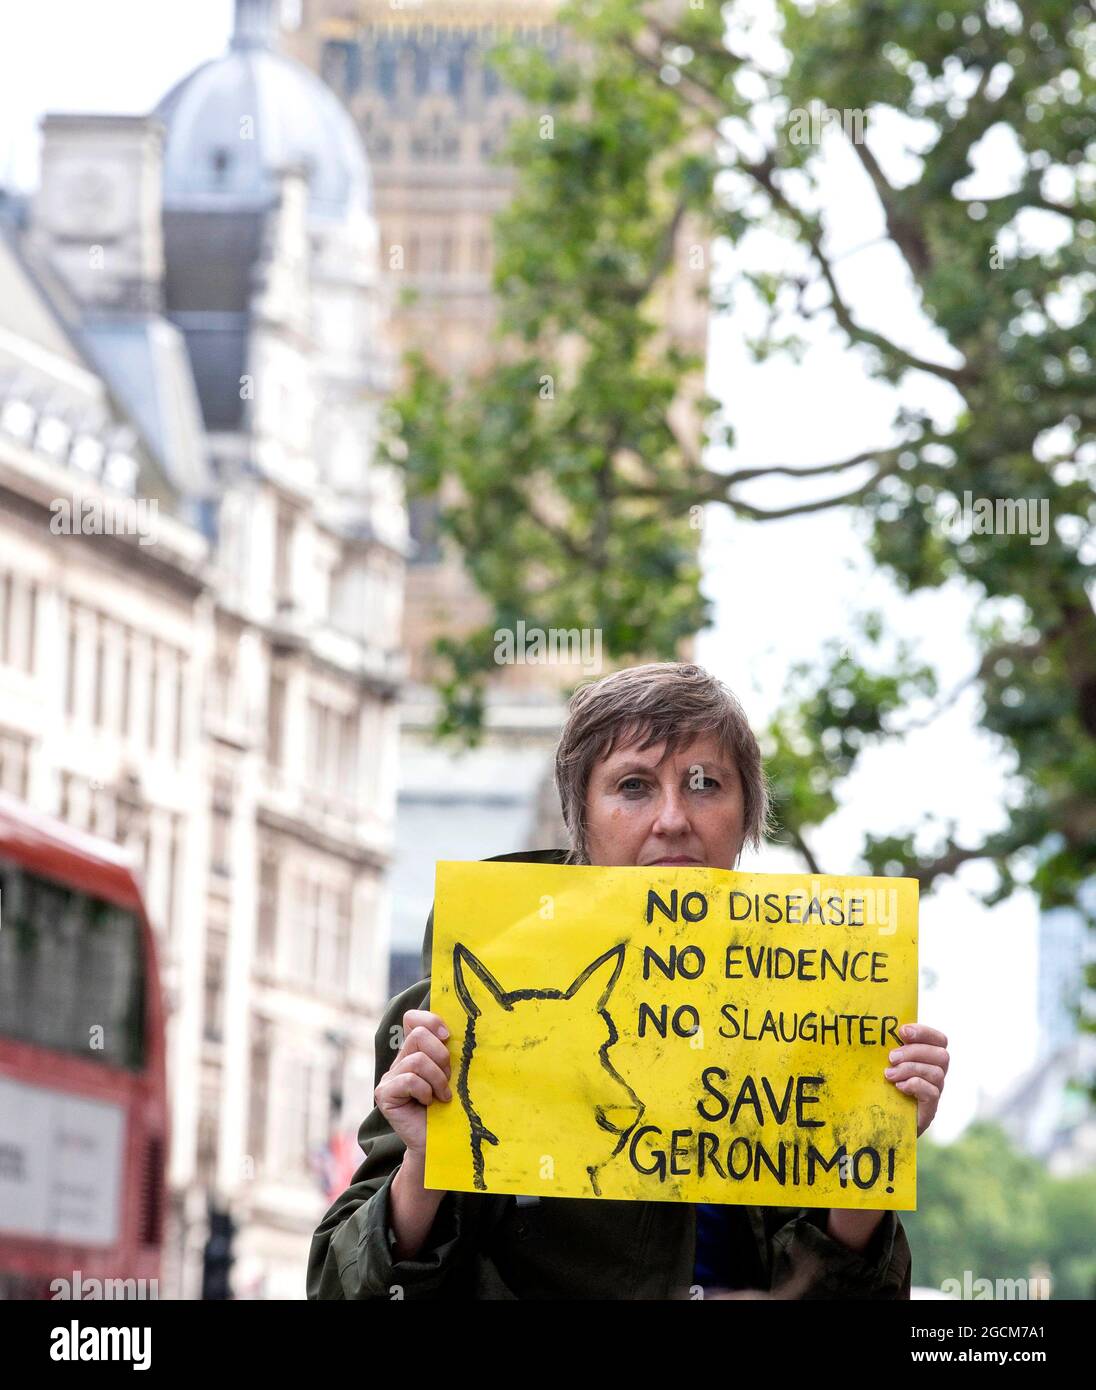 London, UK 9 Aug 2021 Protestors gather outside DEFRA before marching on to Downing Street. They are calling on the Environment Secretary, George Eustice, to consider a retest for the Alpaca named Geronimo. They are asking that Geronimo be retested as the current test is not accurate. Geronimo has twice tested positive for bovine tuberculosis, and the Department of Food, Environment and Rural Affairs has ordered he be euthanised. Credit: Mark Thomas/Alamy Live News Stock Photo